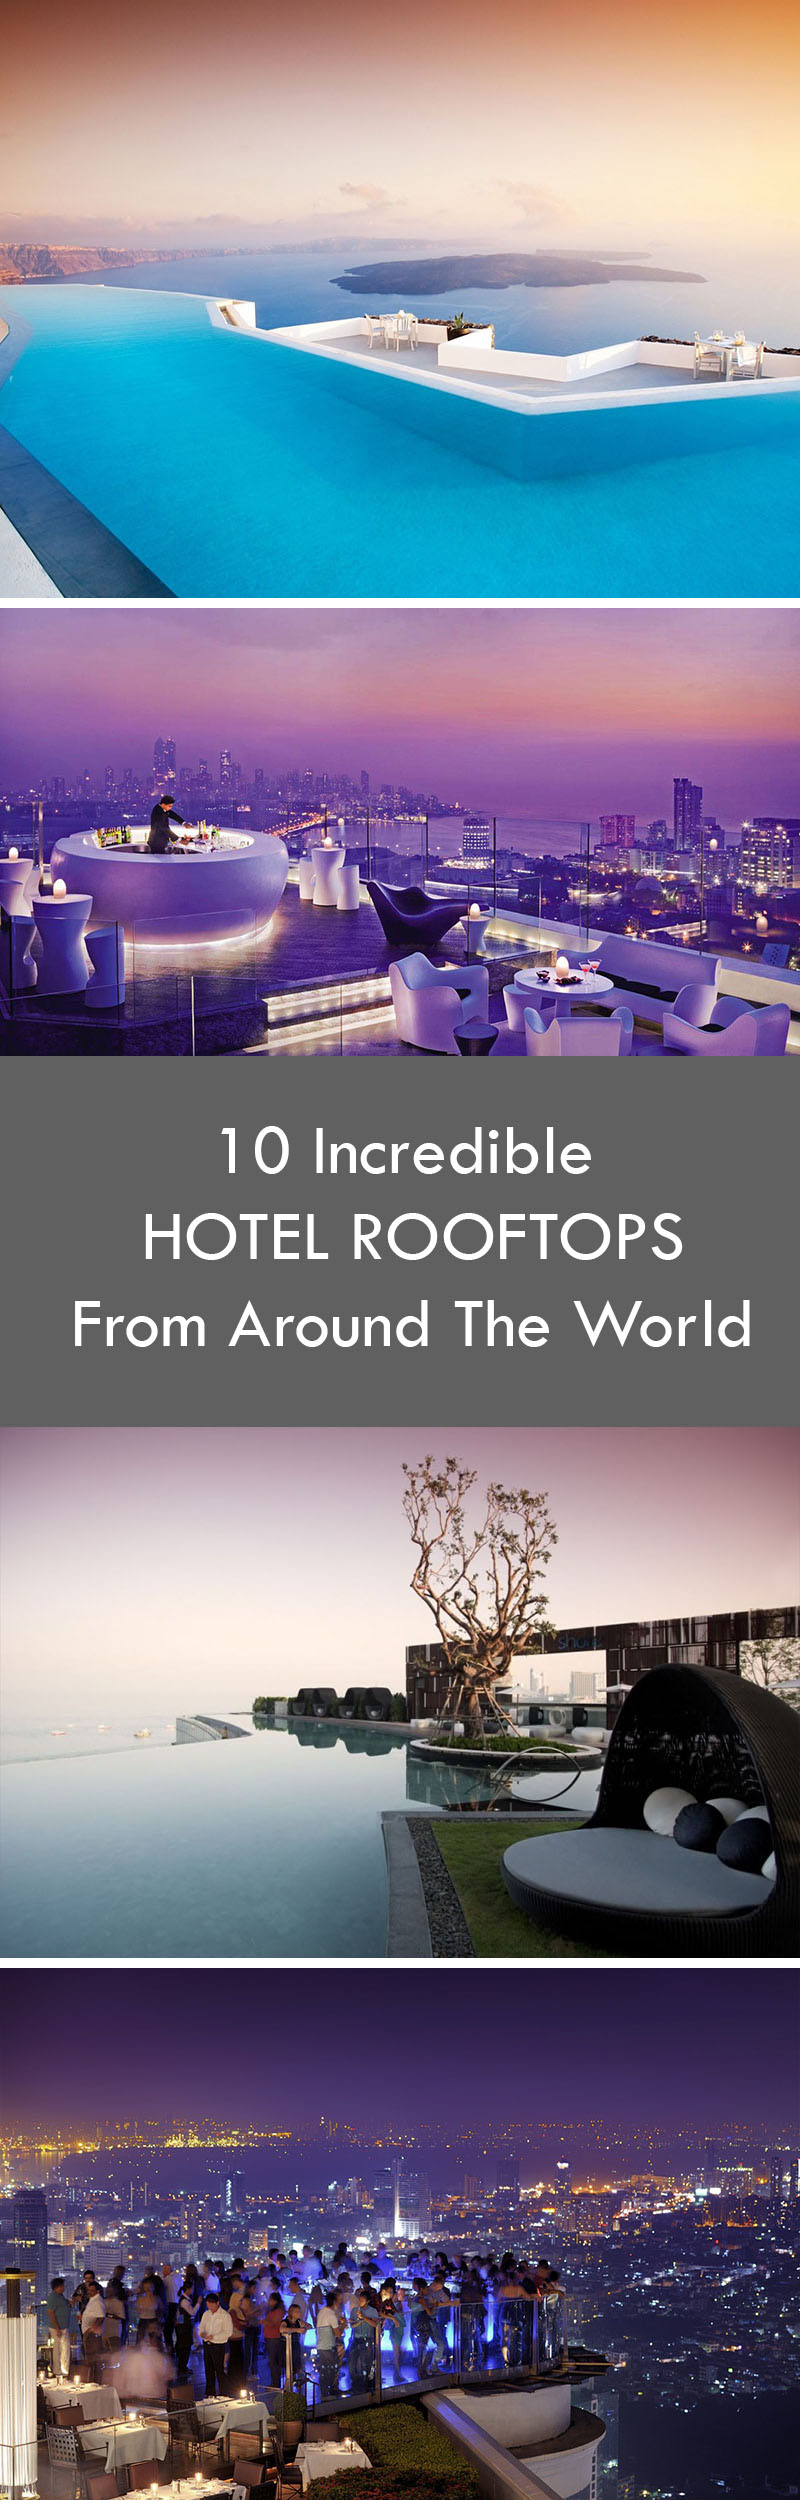 10 Incredible Hotel Rooftops From Around The World